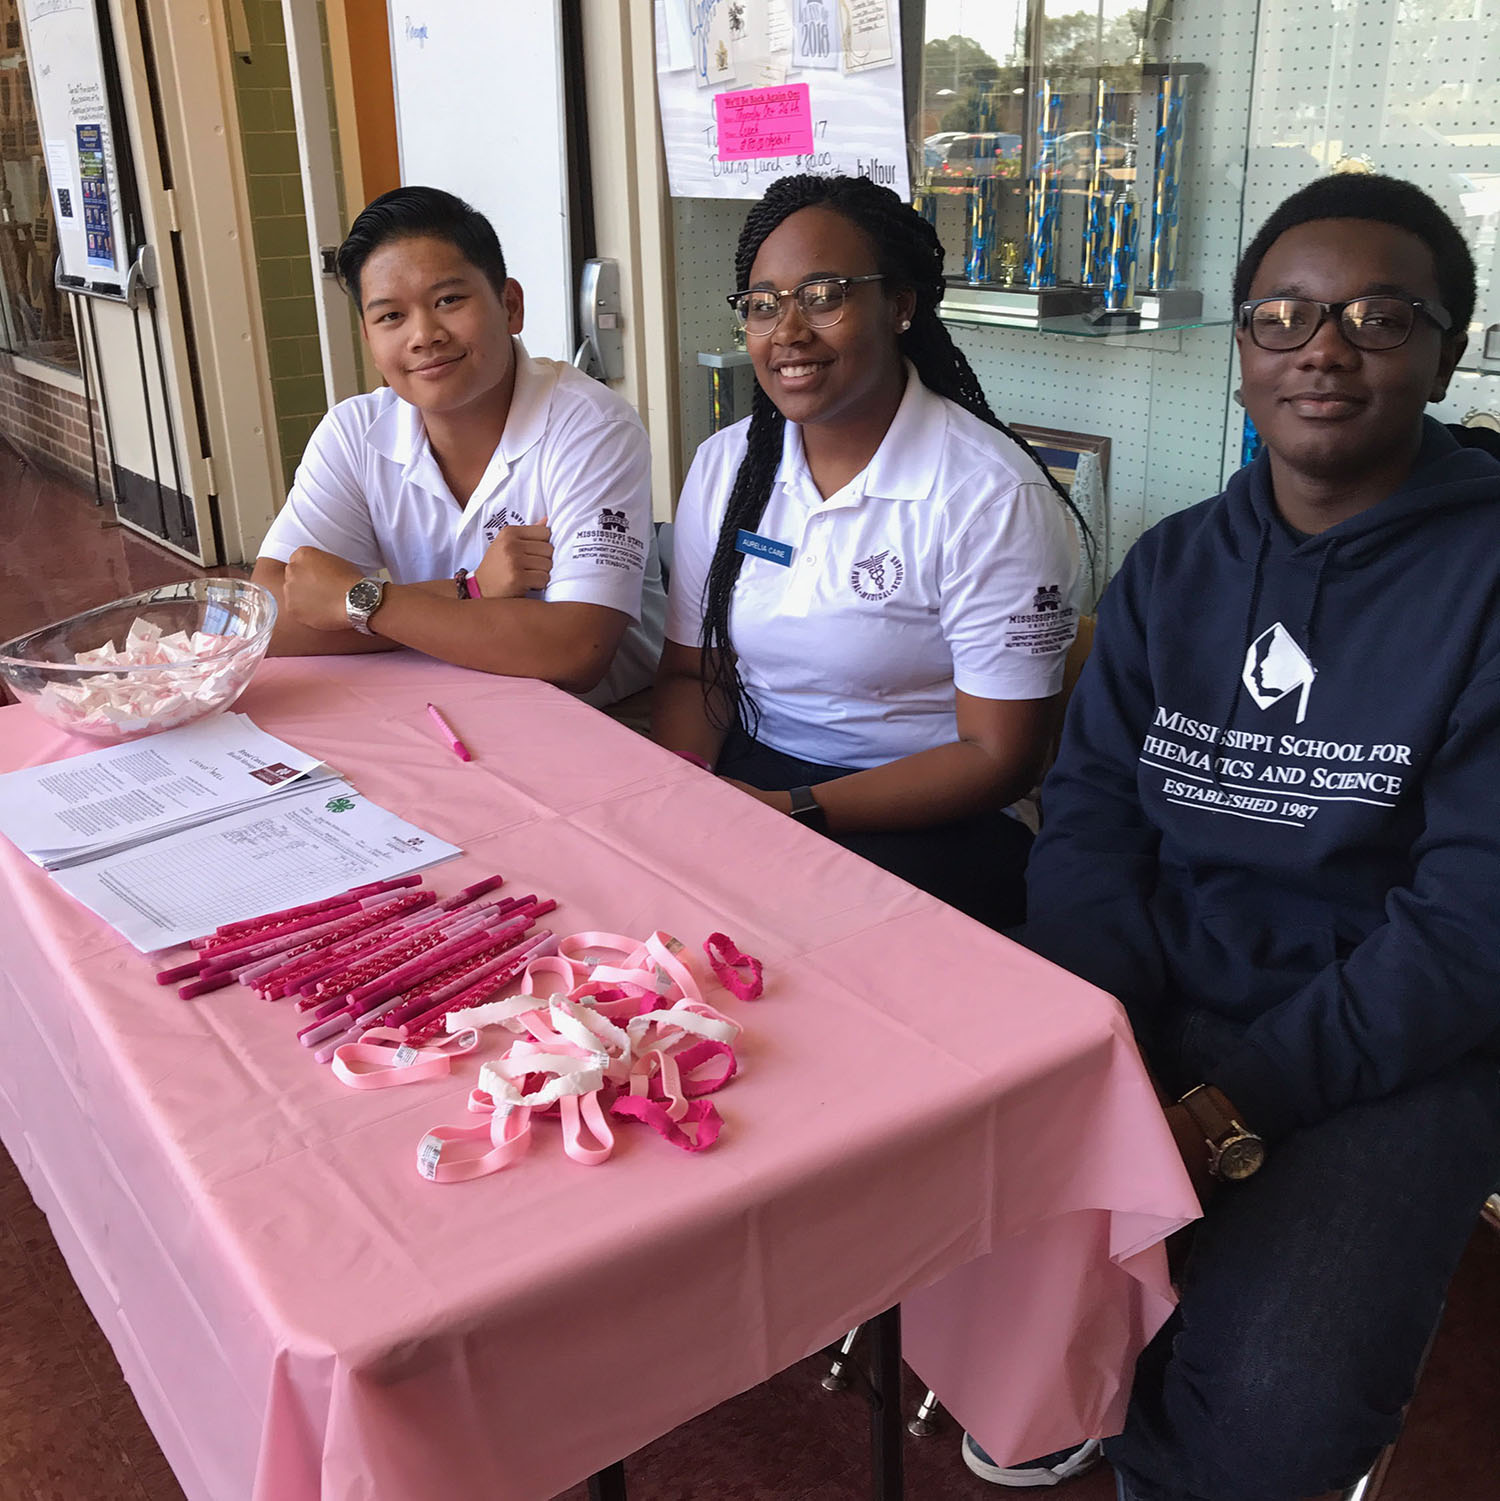 Daniel, Aurelia, and Carey are manning a Breast Cancer Awareness Booth